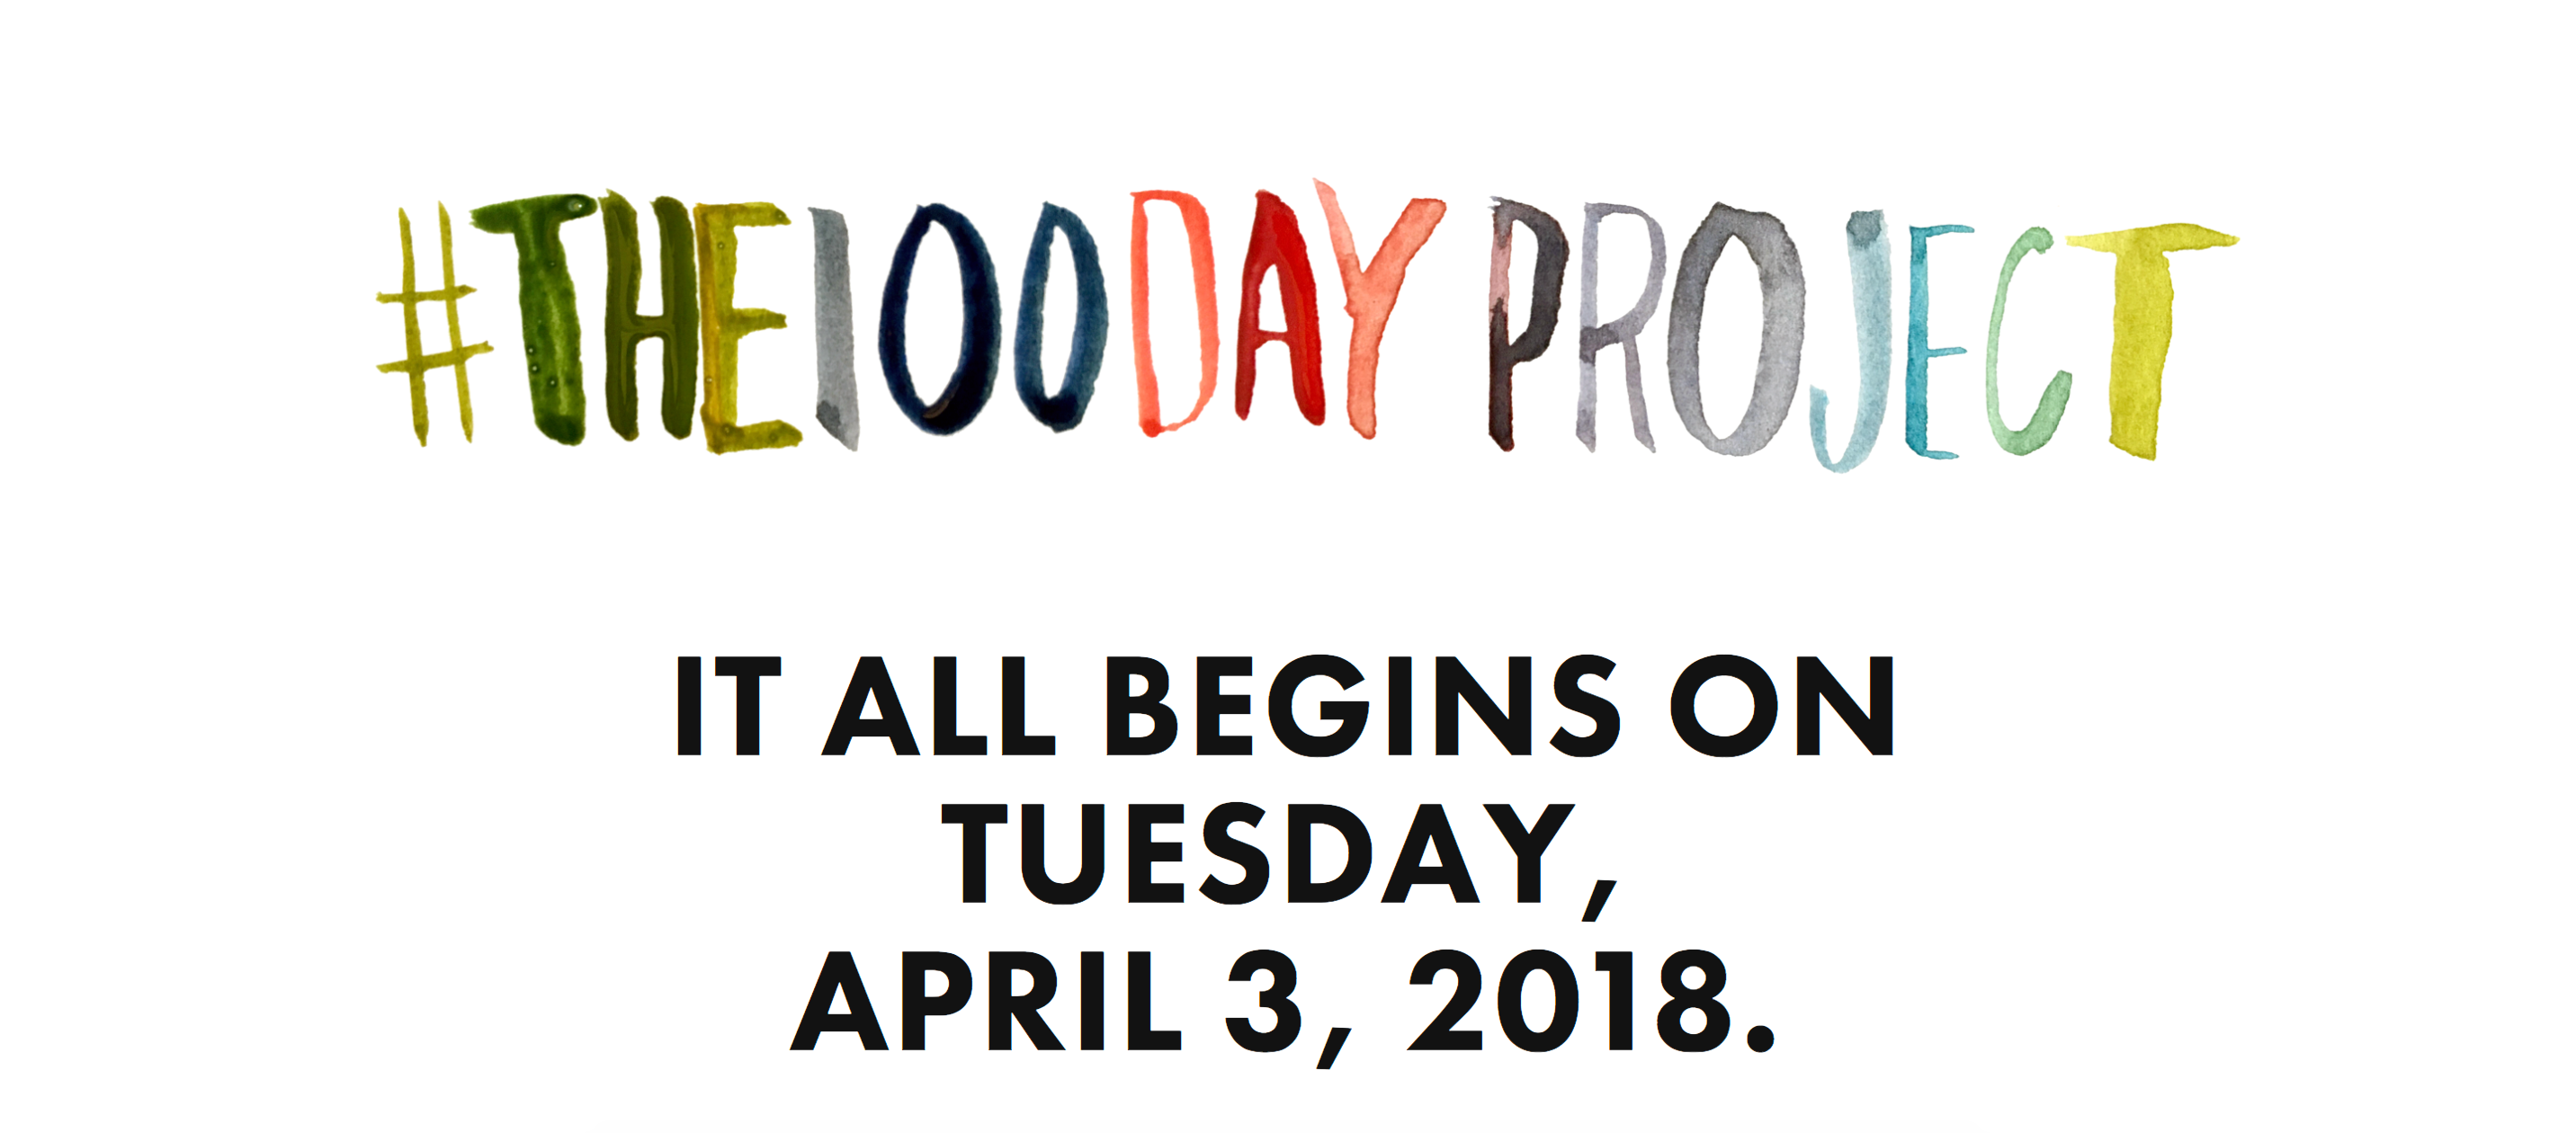 The 100 Day Project. 100 Days of Writing by Joseph Emmi Thoughts On